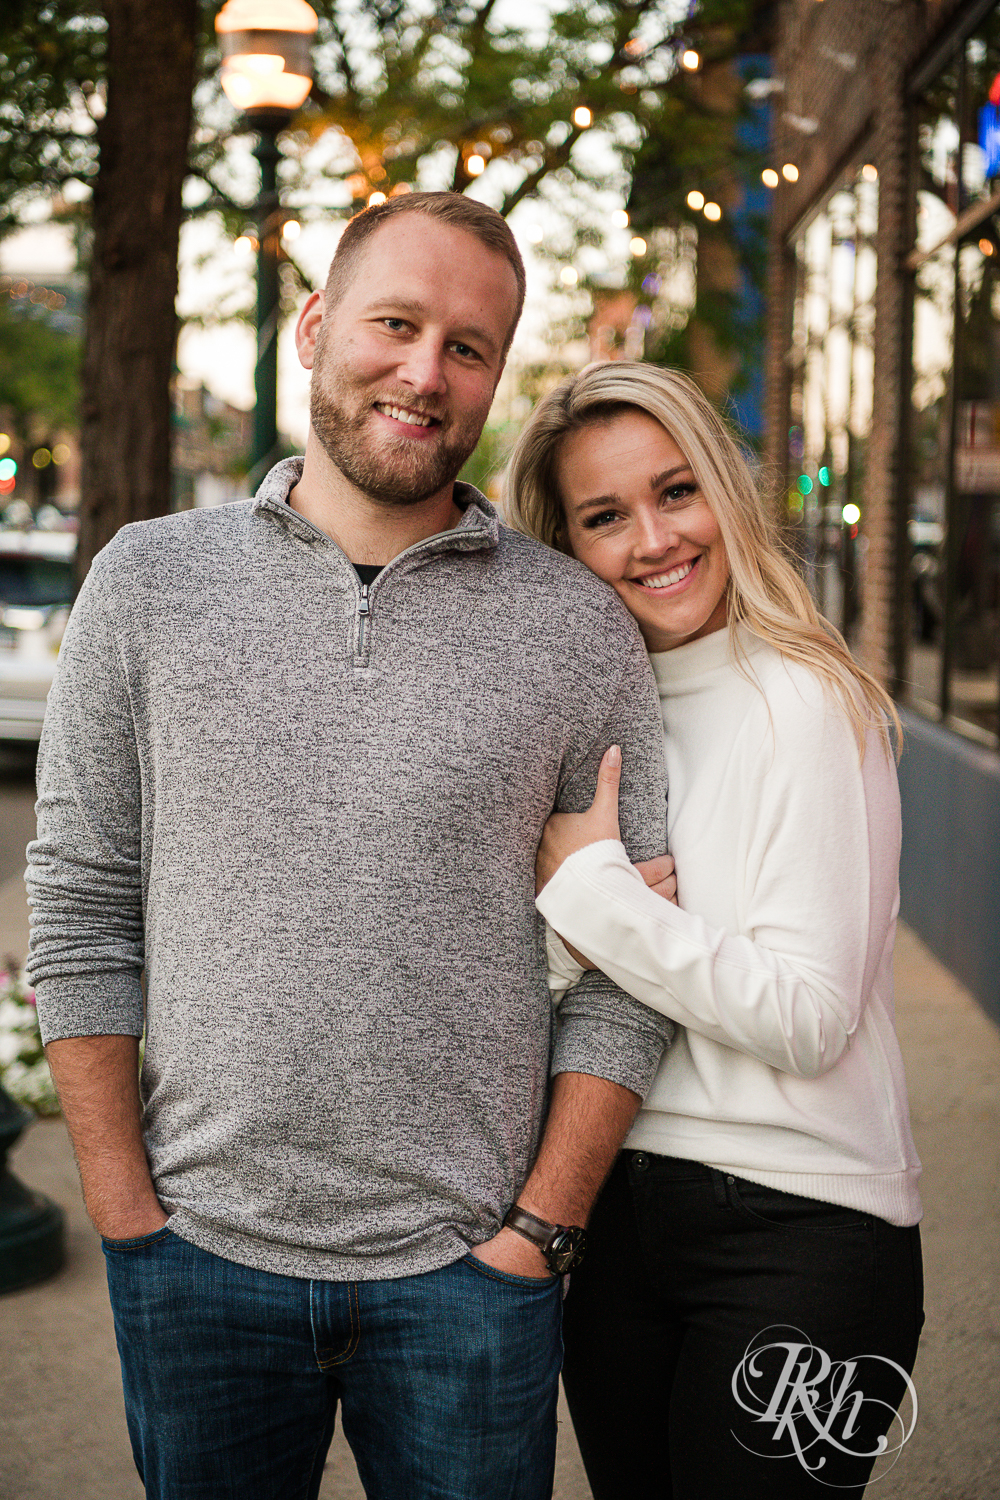 Blonde man and woman in sweaters and jeans smile at sunset in Saint Paul, Minnesota.